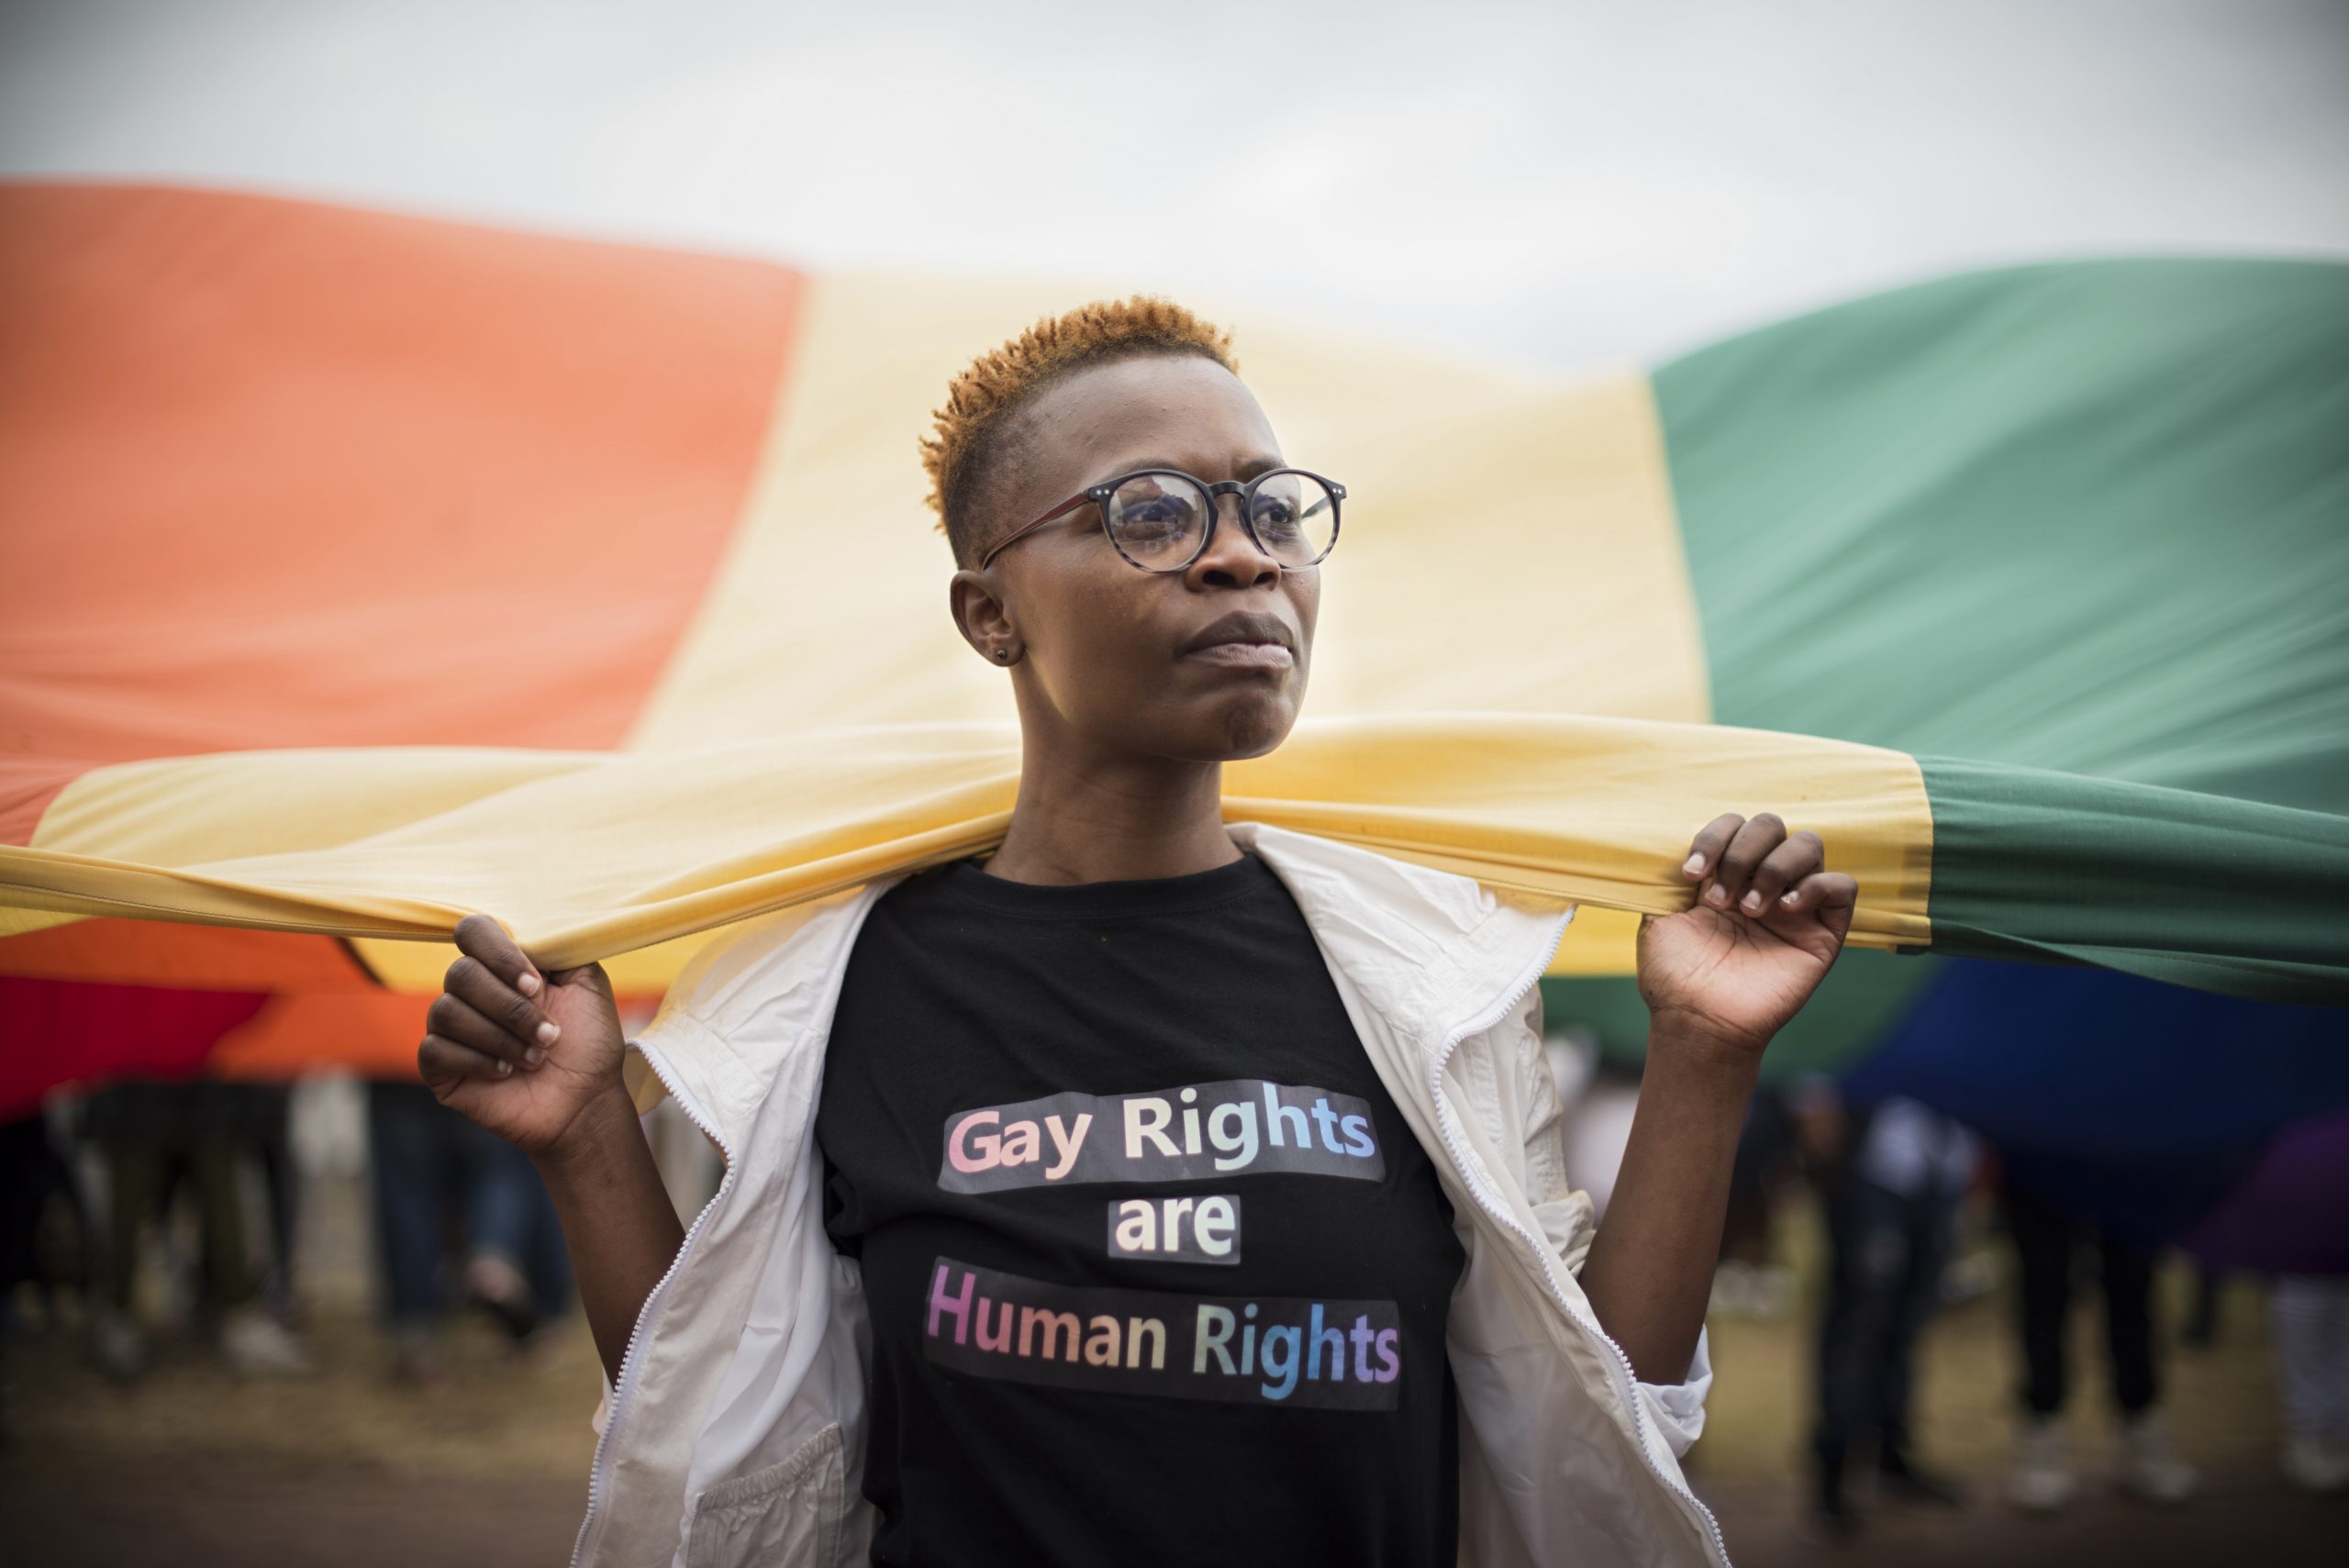 UPR Submission on Violence against LGBTIQ+ persons in South Africa 